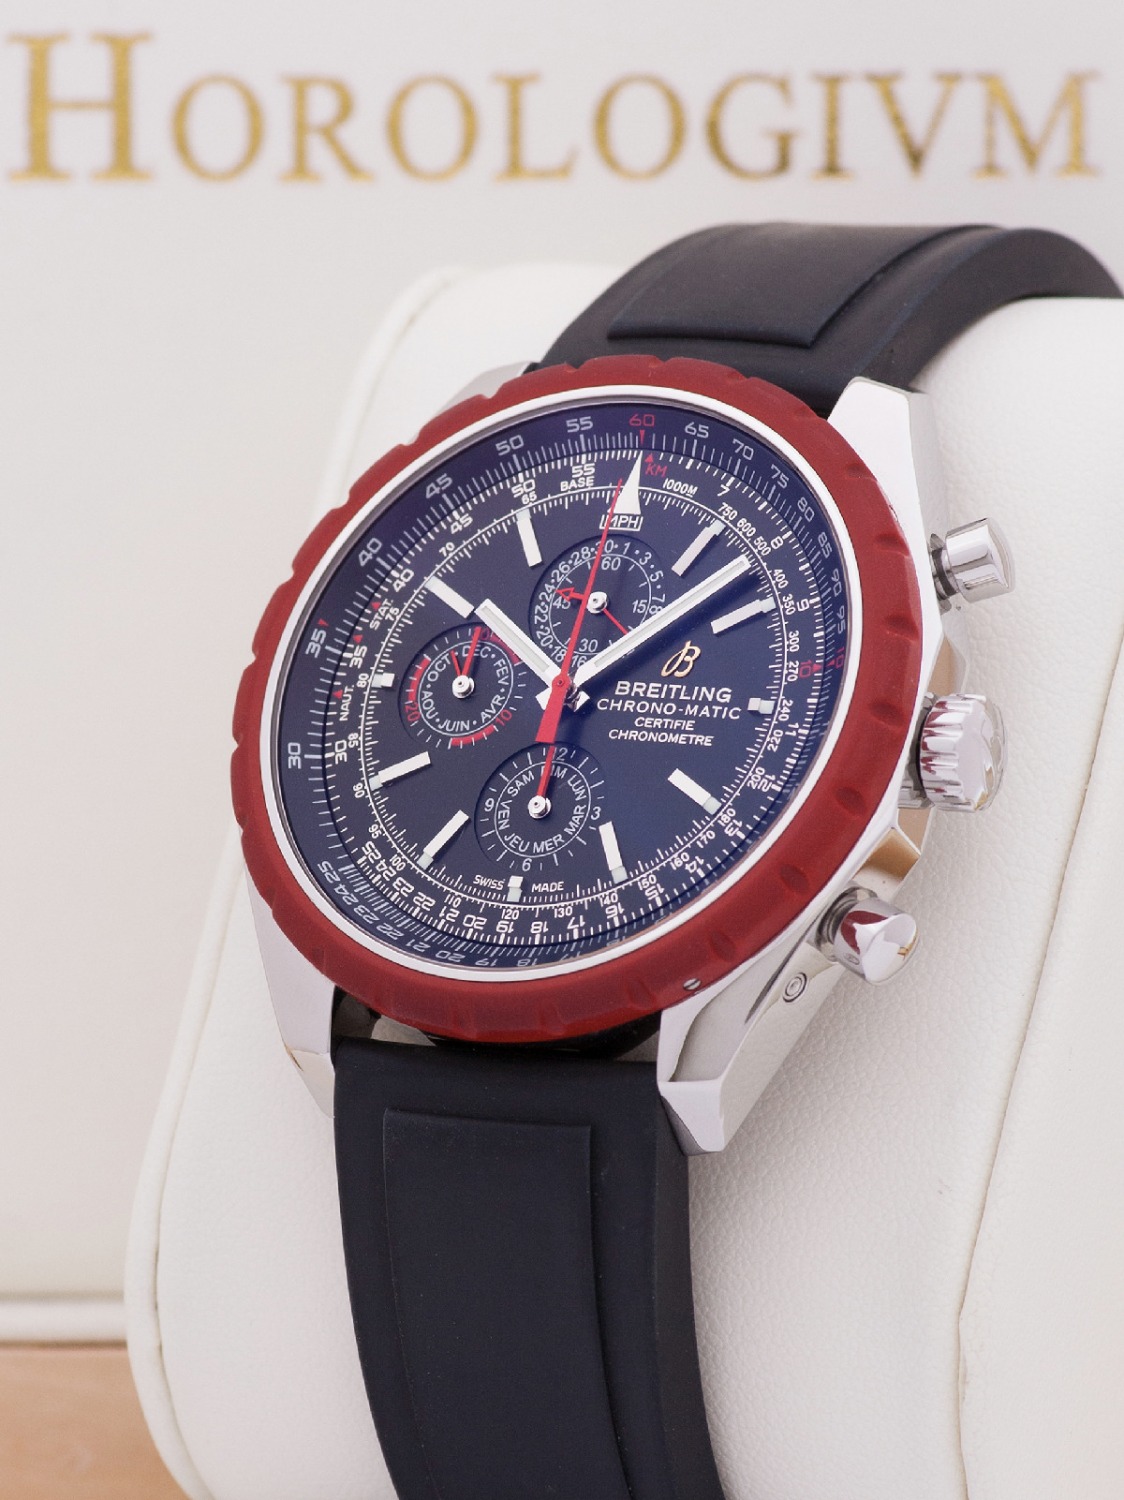 Breitling Chrono-Matic 1461 Limited 500 pcs. watch, silver (case) and red (bezel)